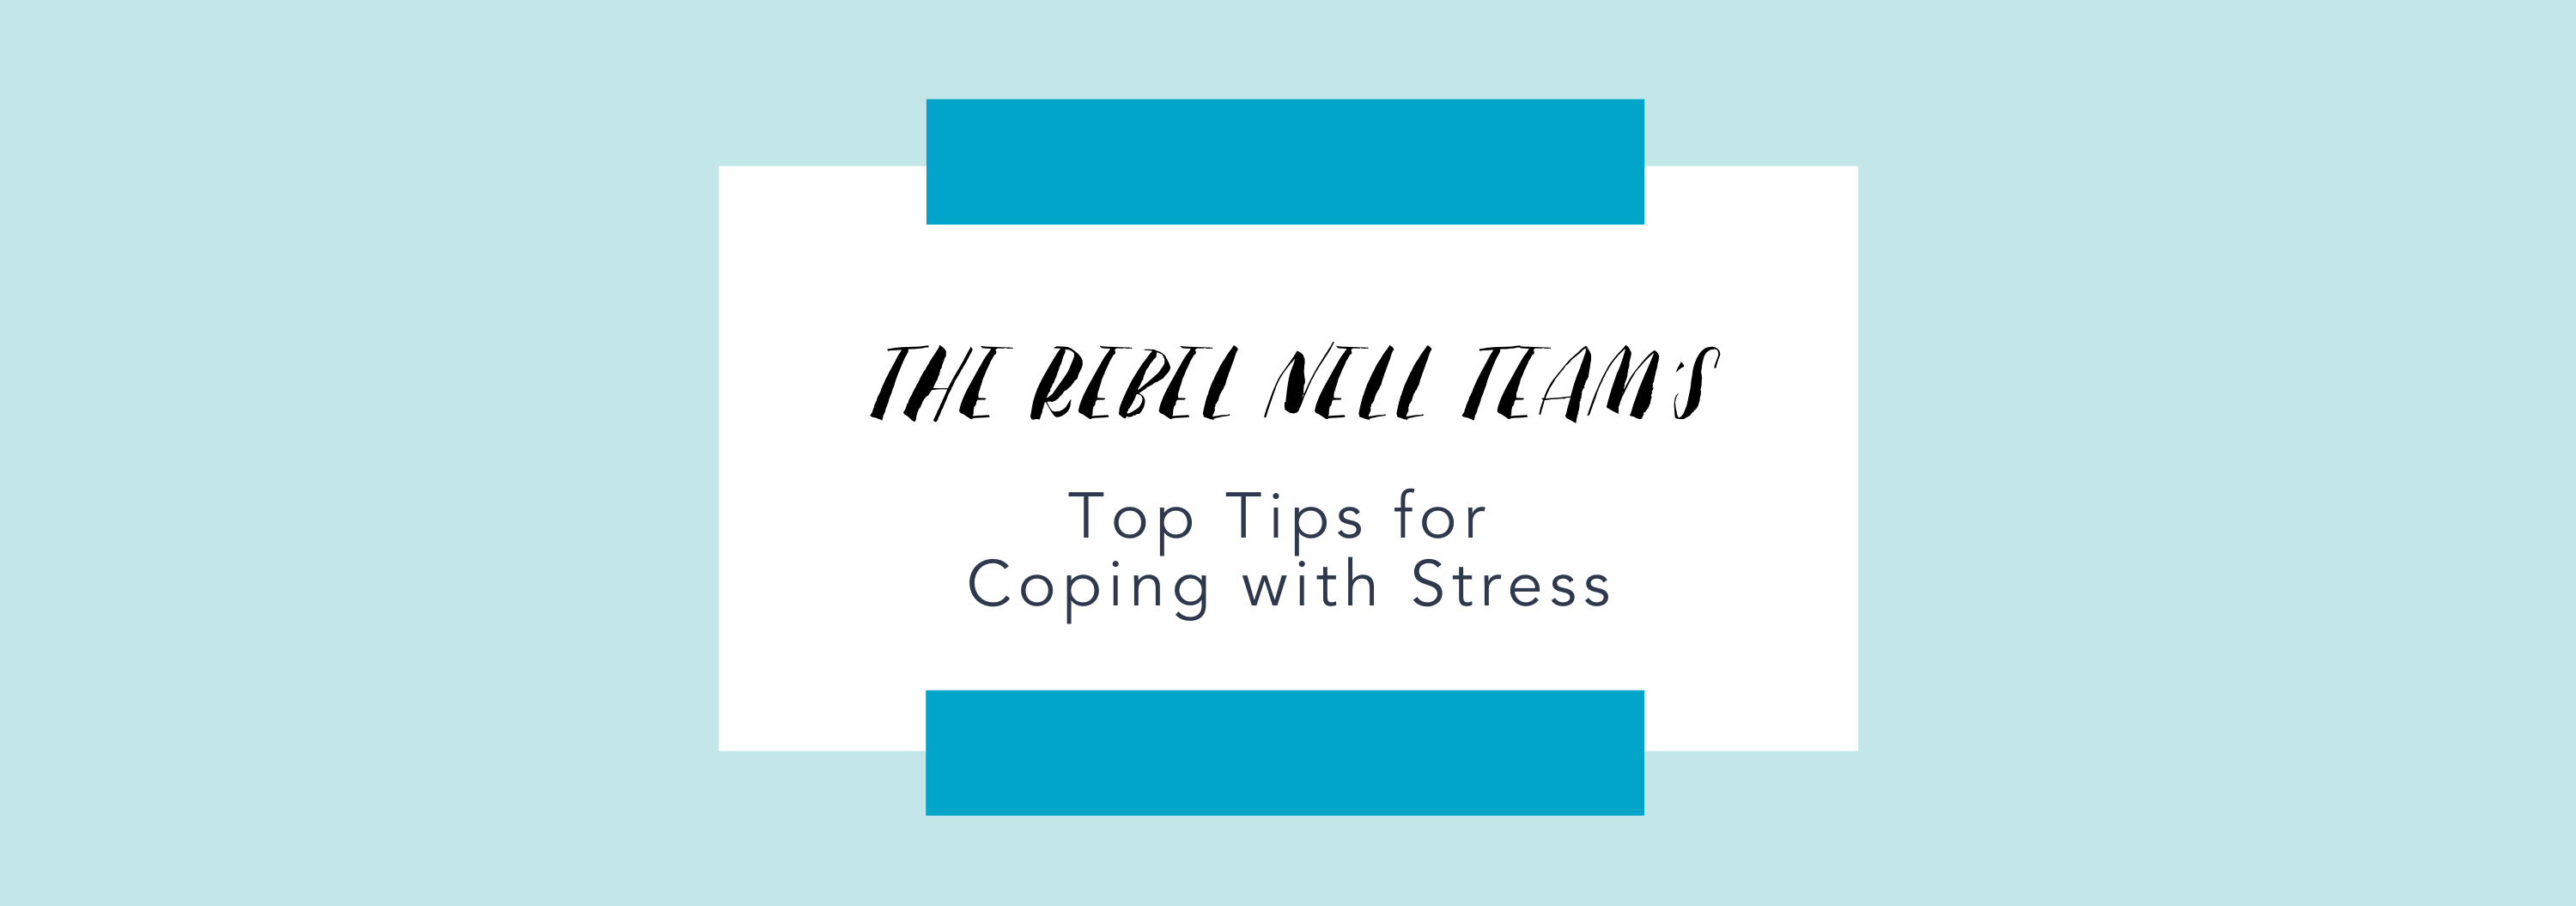 Rebel Nell Top Tips for Coping with Stress